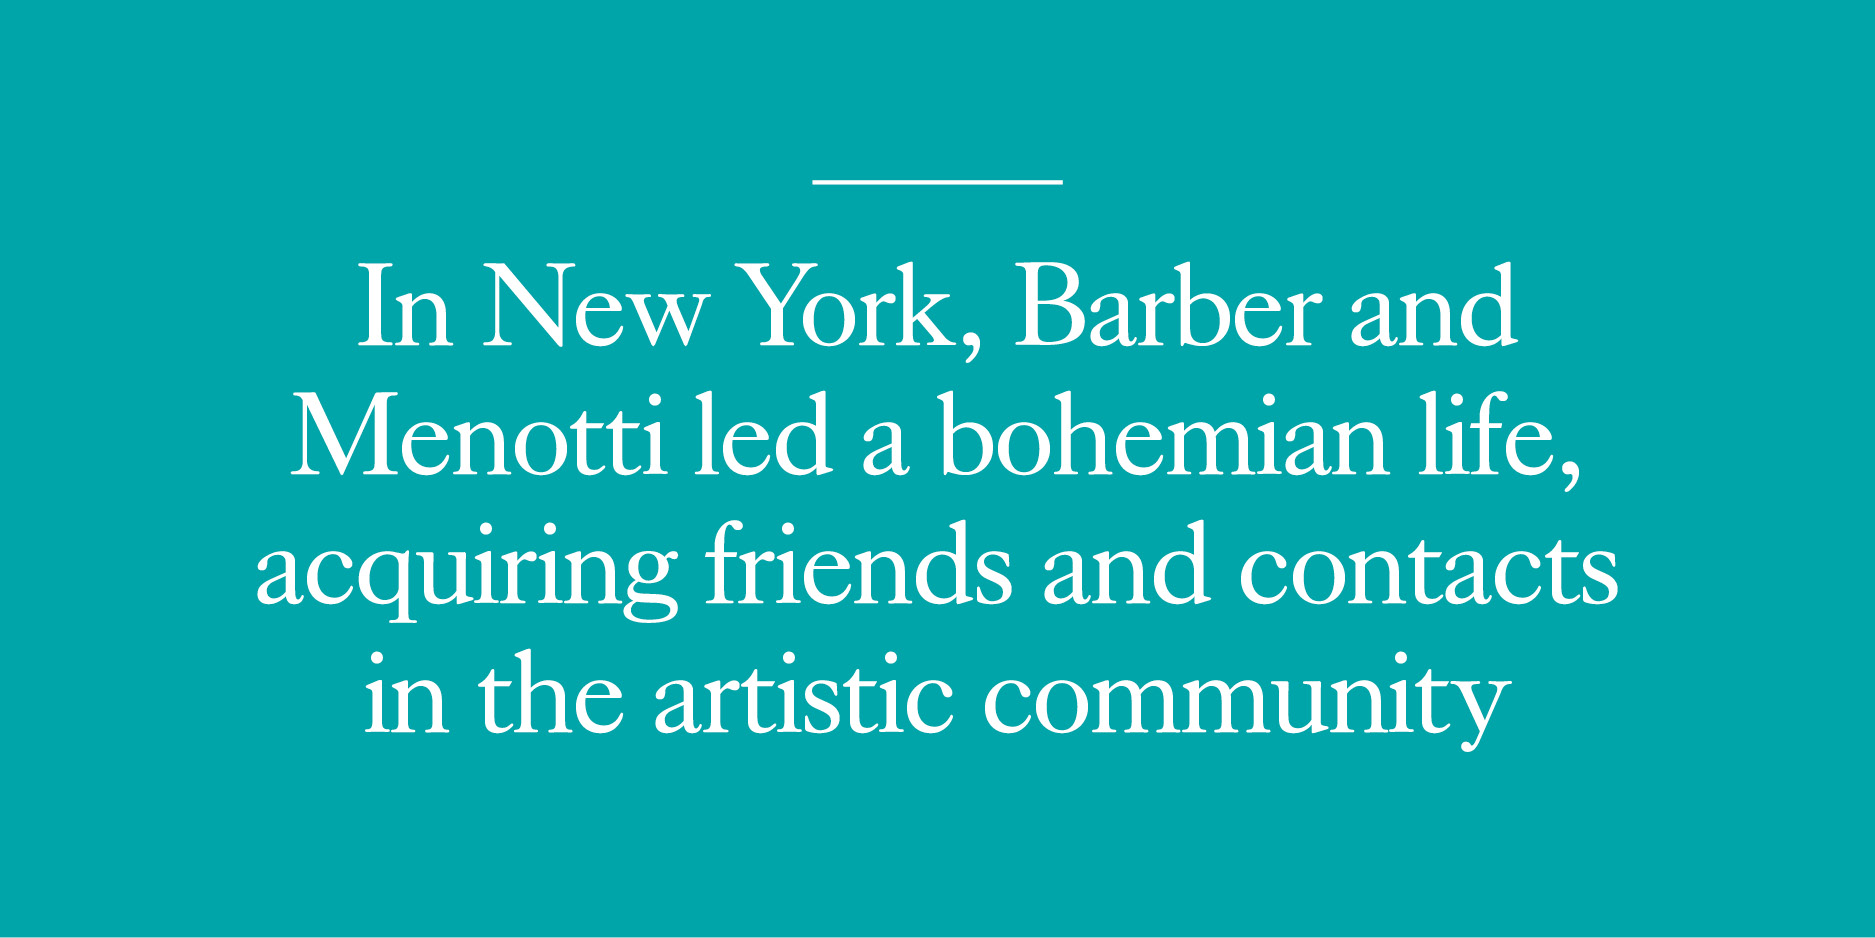 In New York, Barber and menotti led a bohemian life, acquiring friends and contacts in the artistic community,